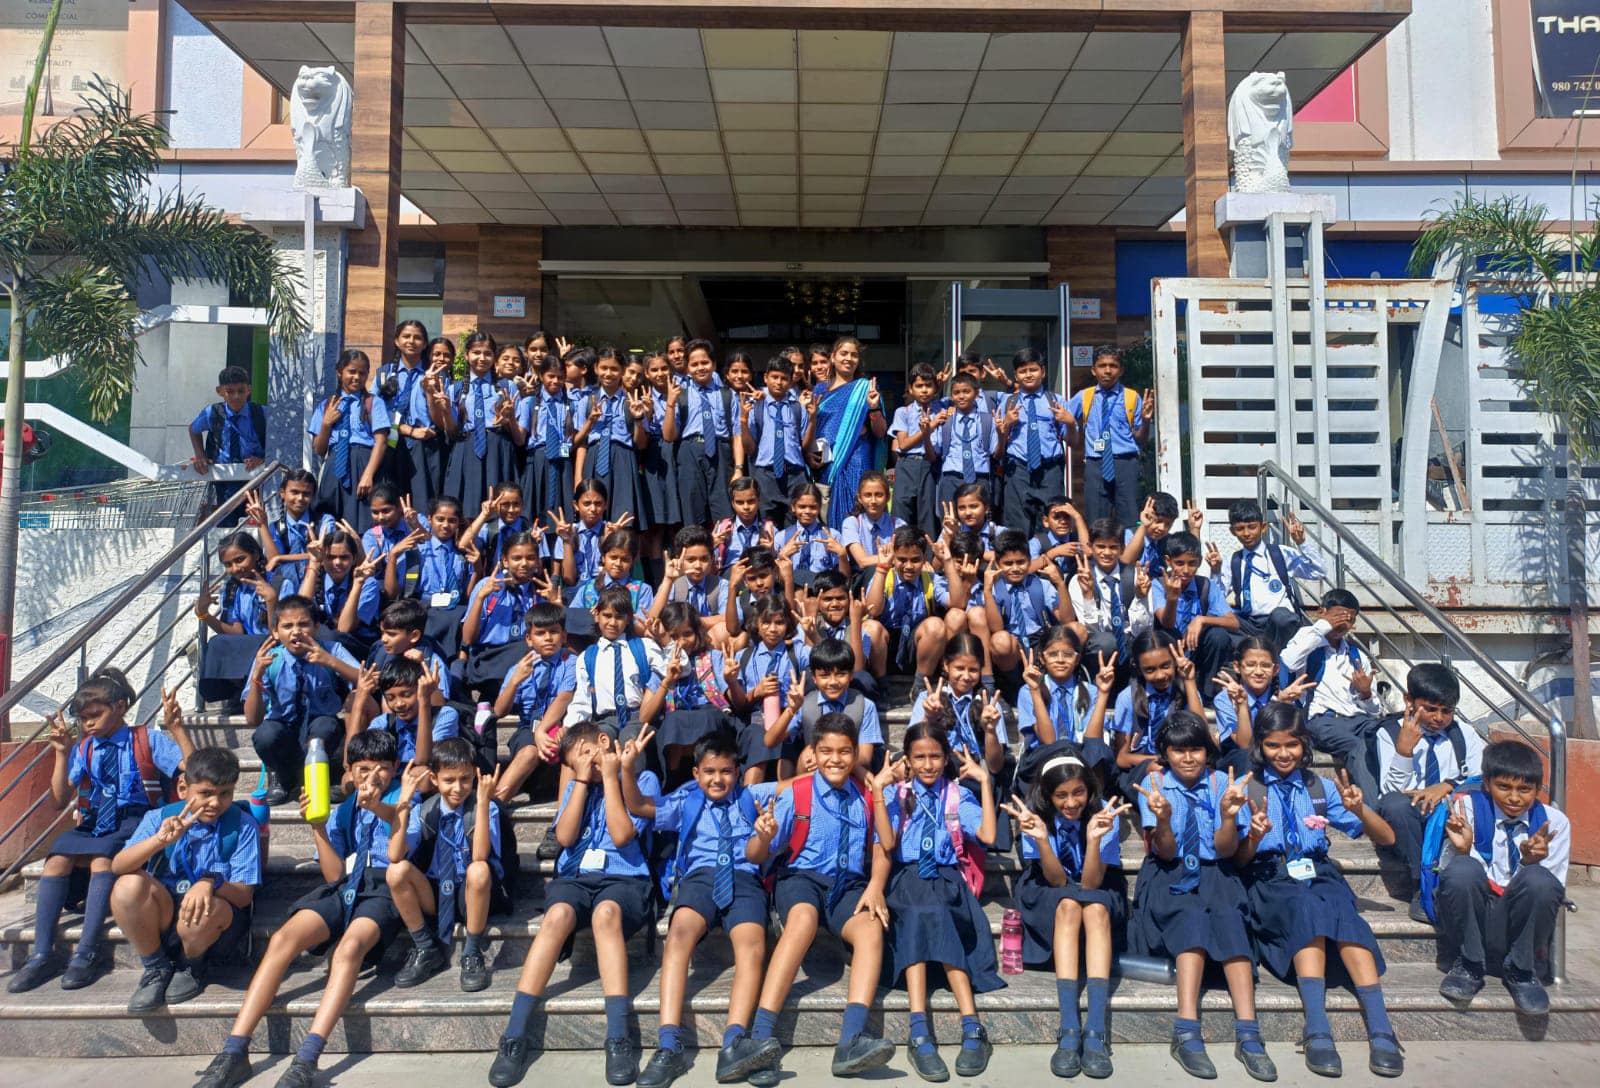 VARDAAN INTERNATIONAL ACADEMY ALONG WITH TRUE OBSERVING INDIA ORGANIZED A FUN FILLED DAY FOR ITS STUDENTS BY TAKING THEM OUT FOR THE MOVIE "JAWAN", AT PVR CINEMAS